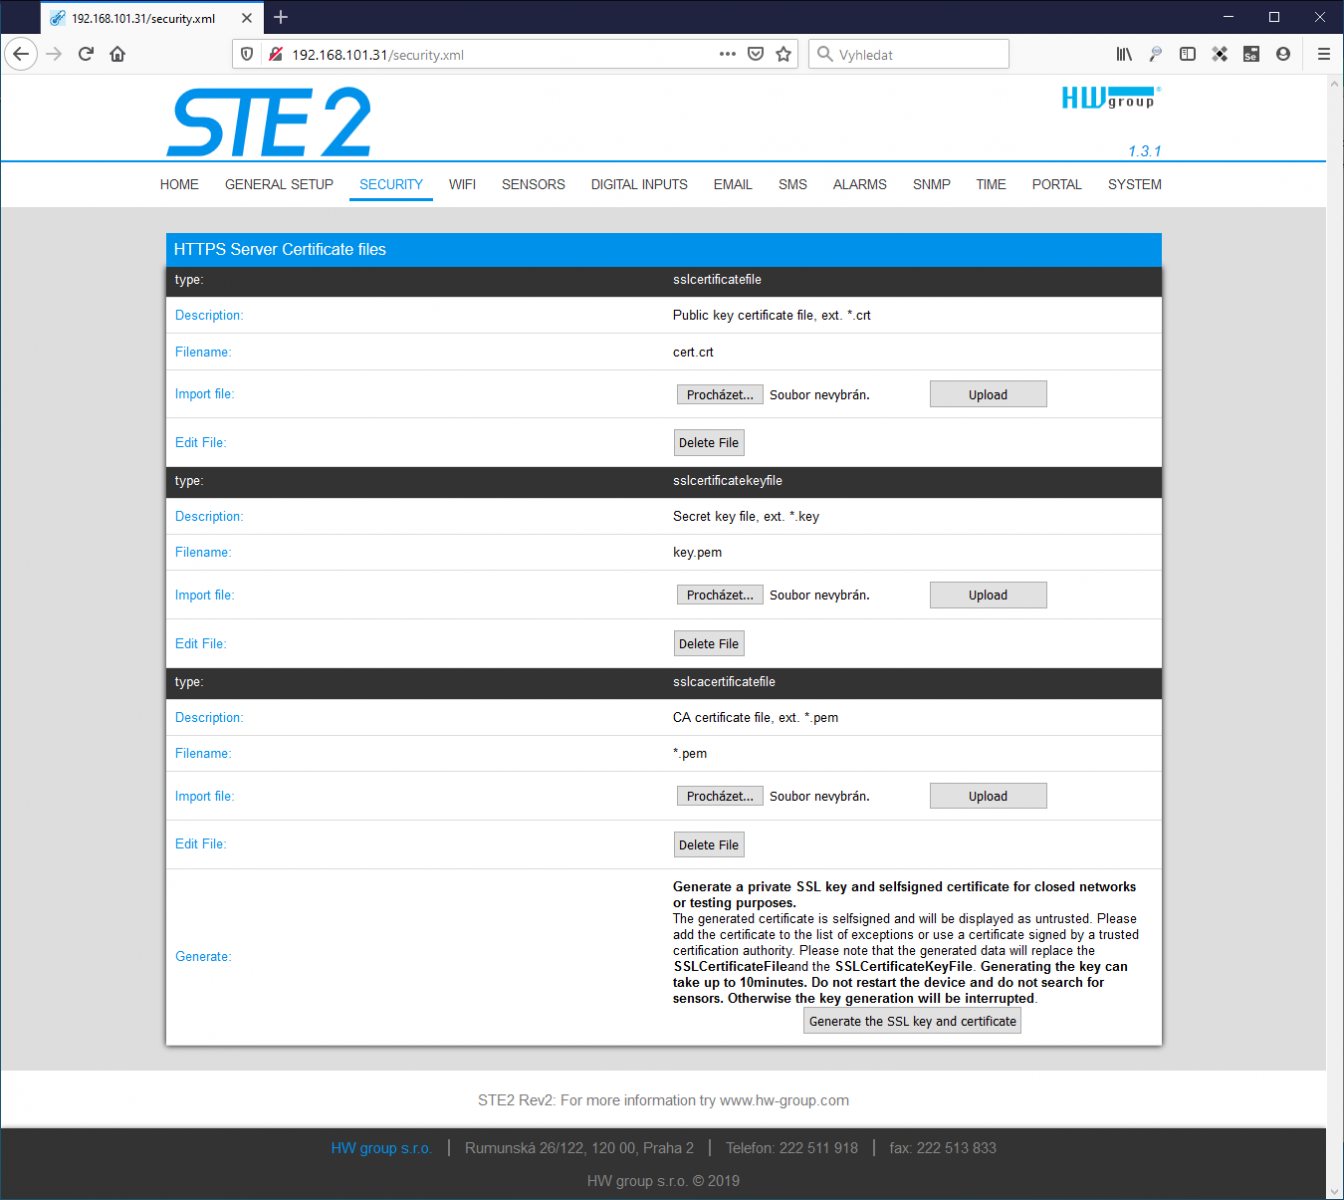 STE2 R2 now allows access to WWW pages via HTTPS secure communication.